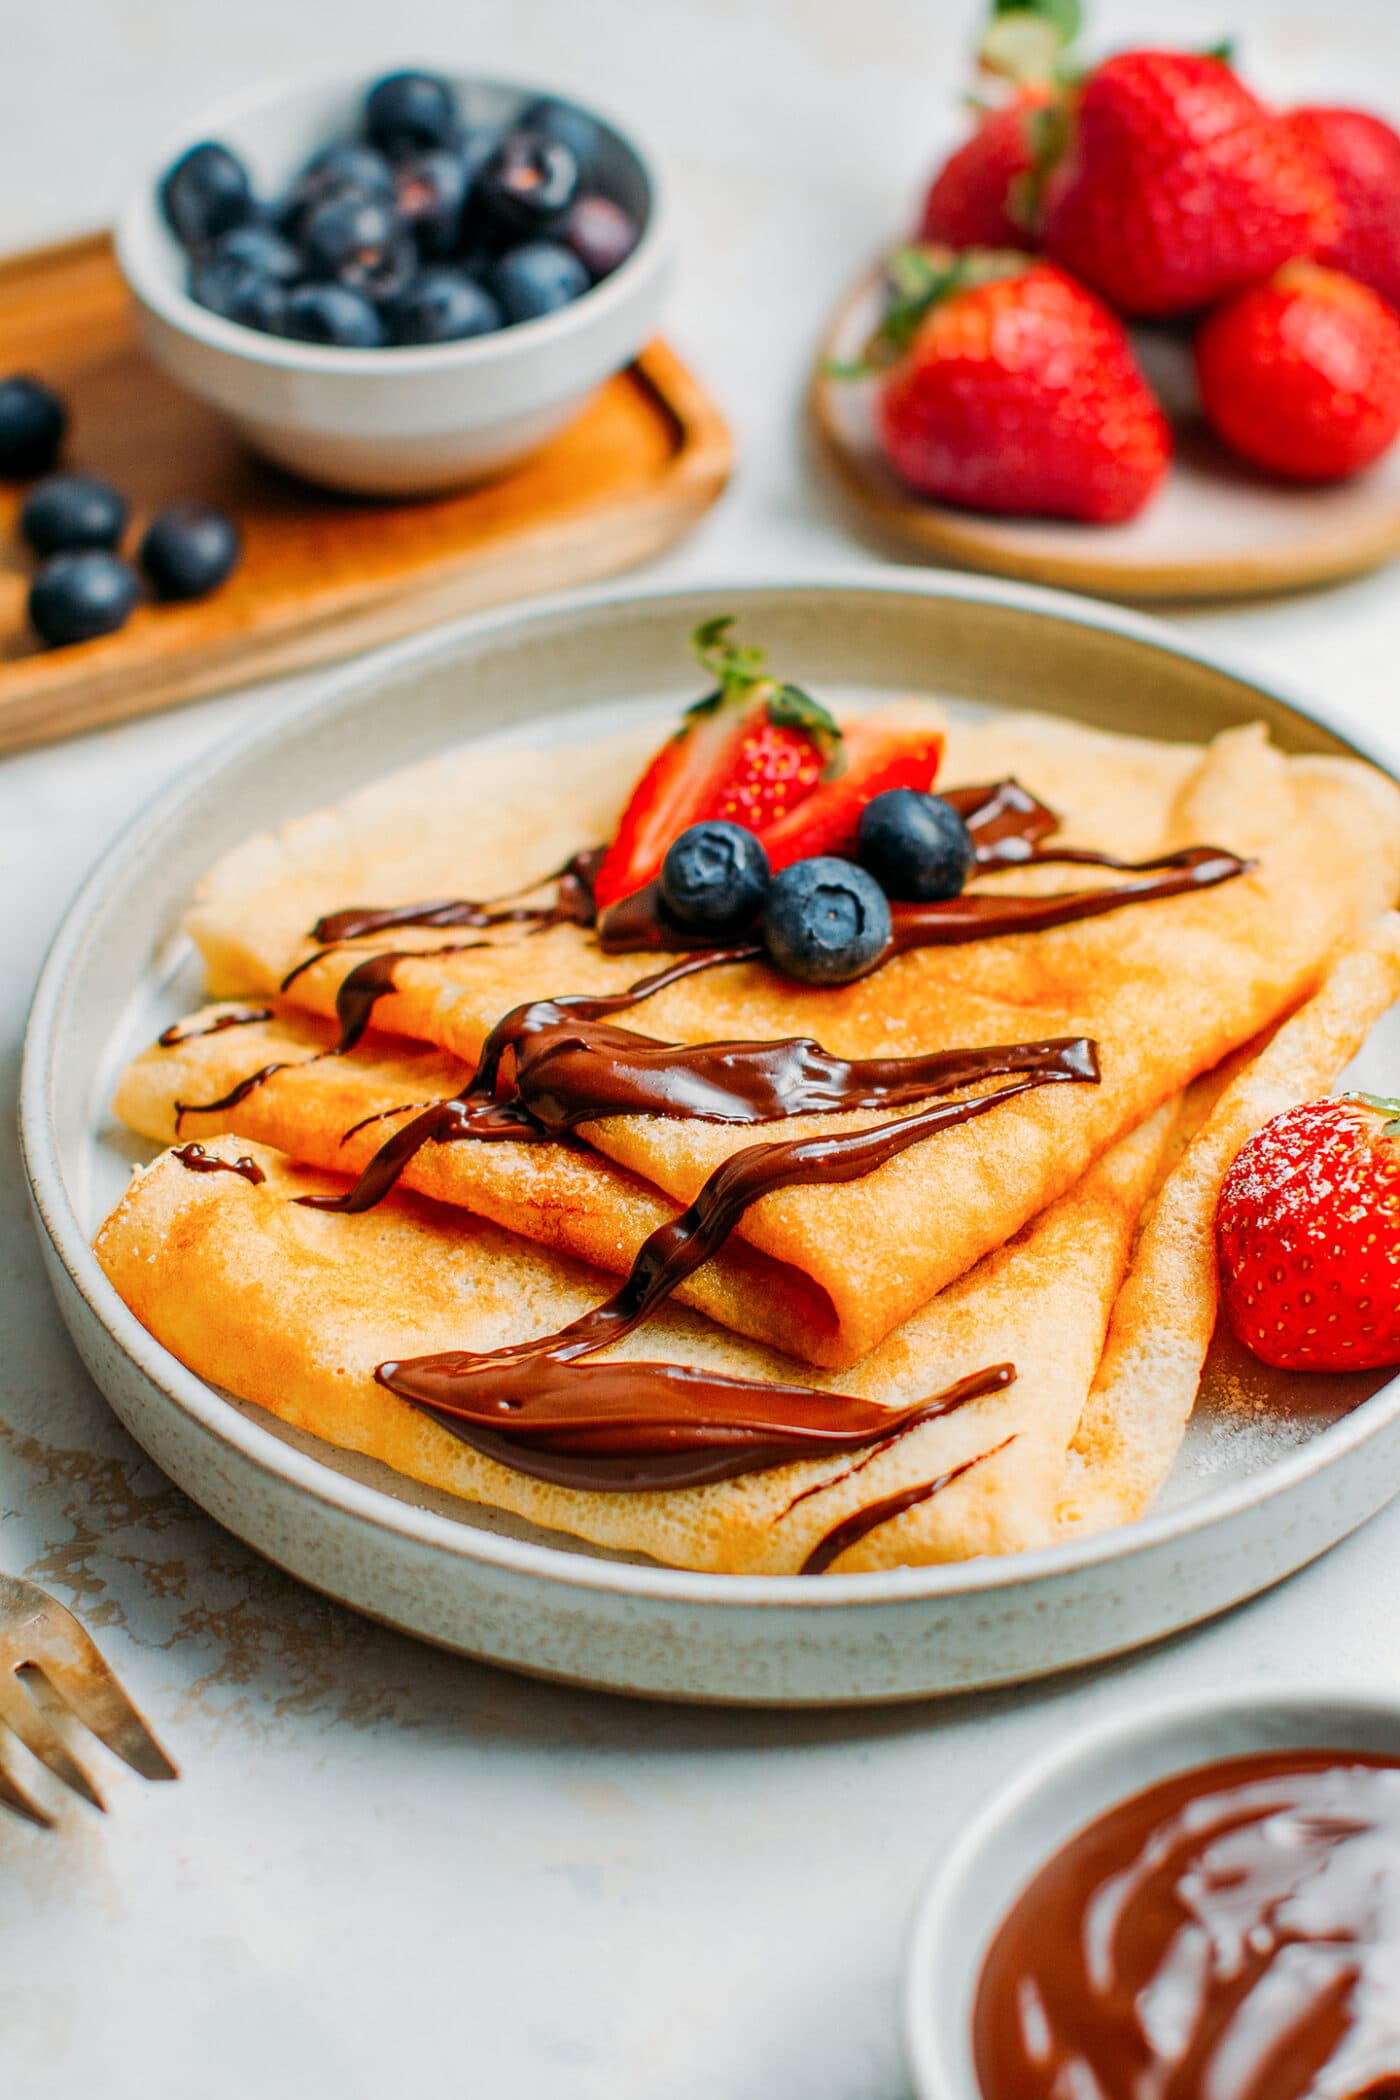 Folded crêpes topped with melted chocolate and berries.